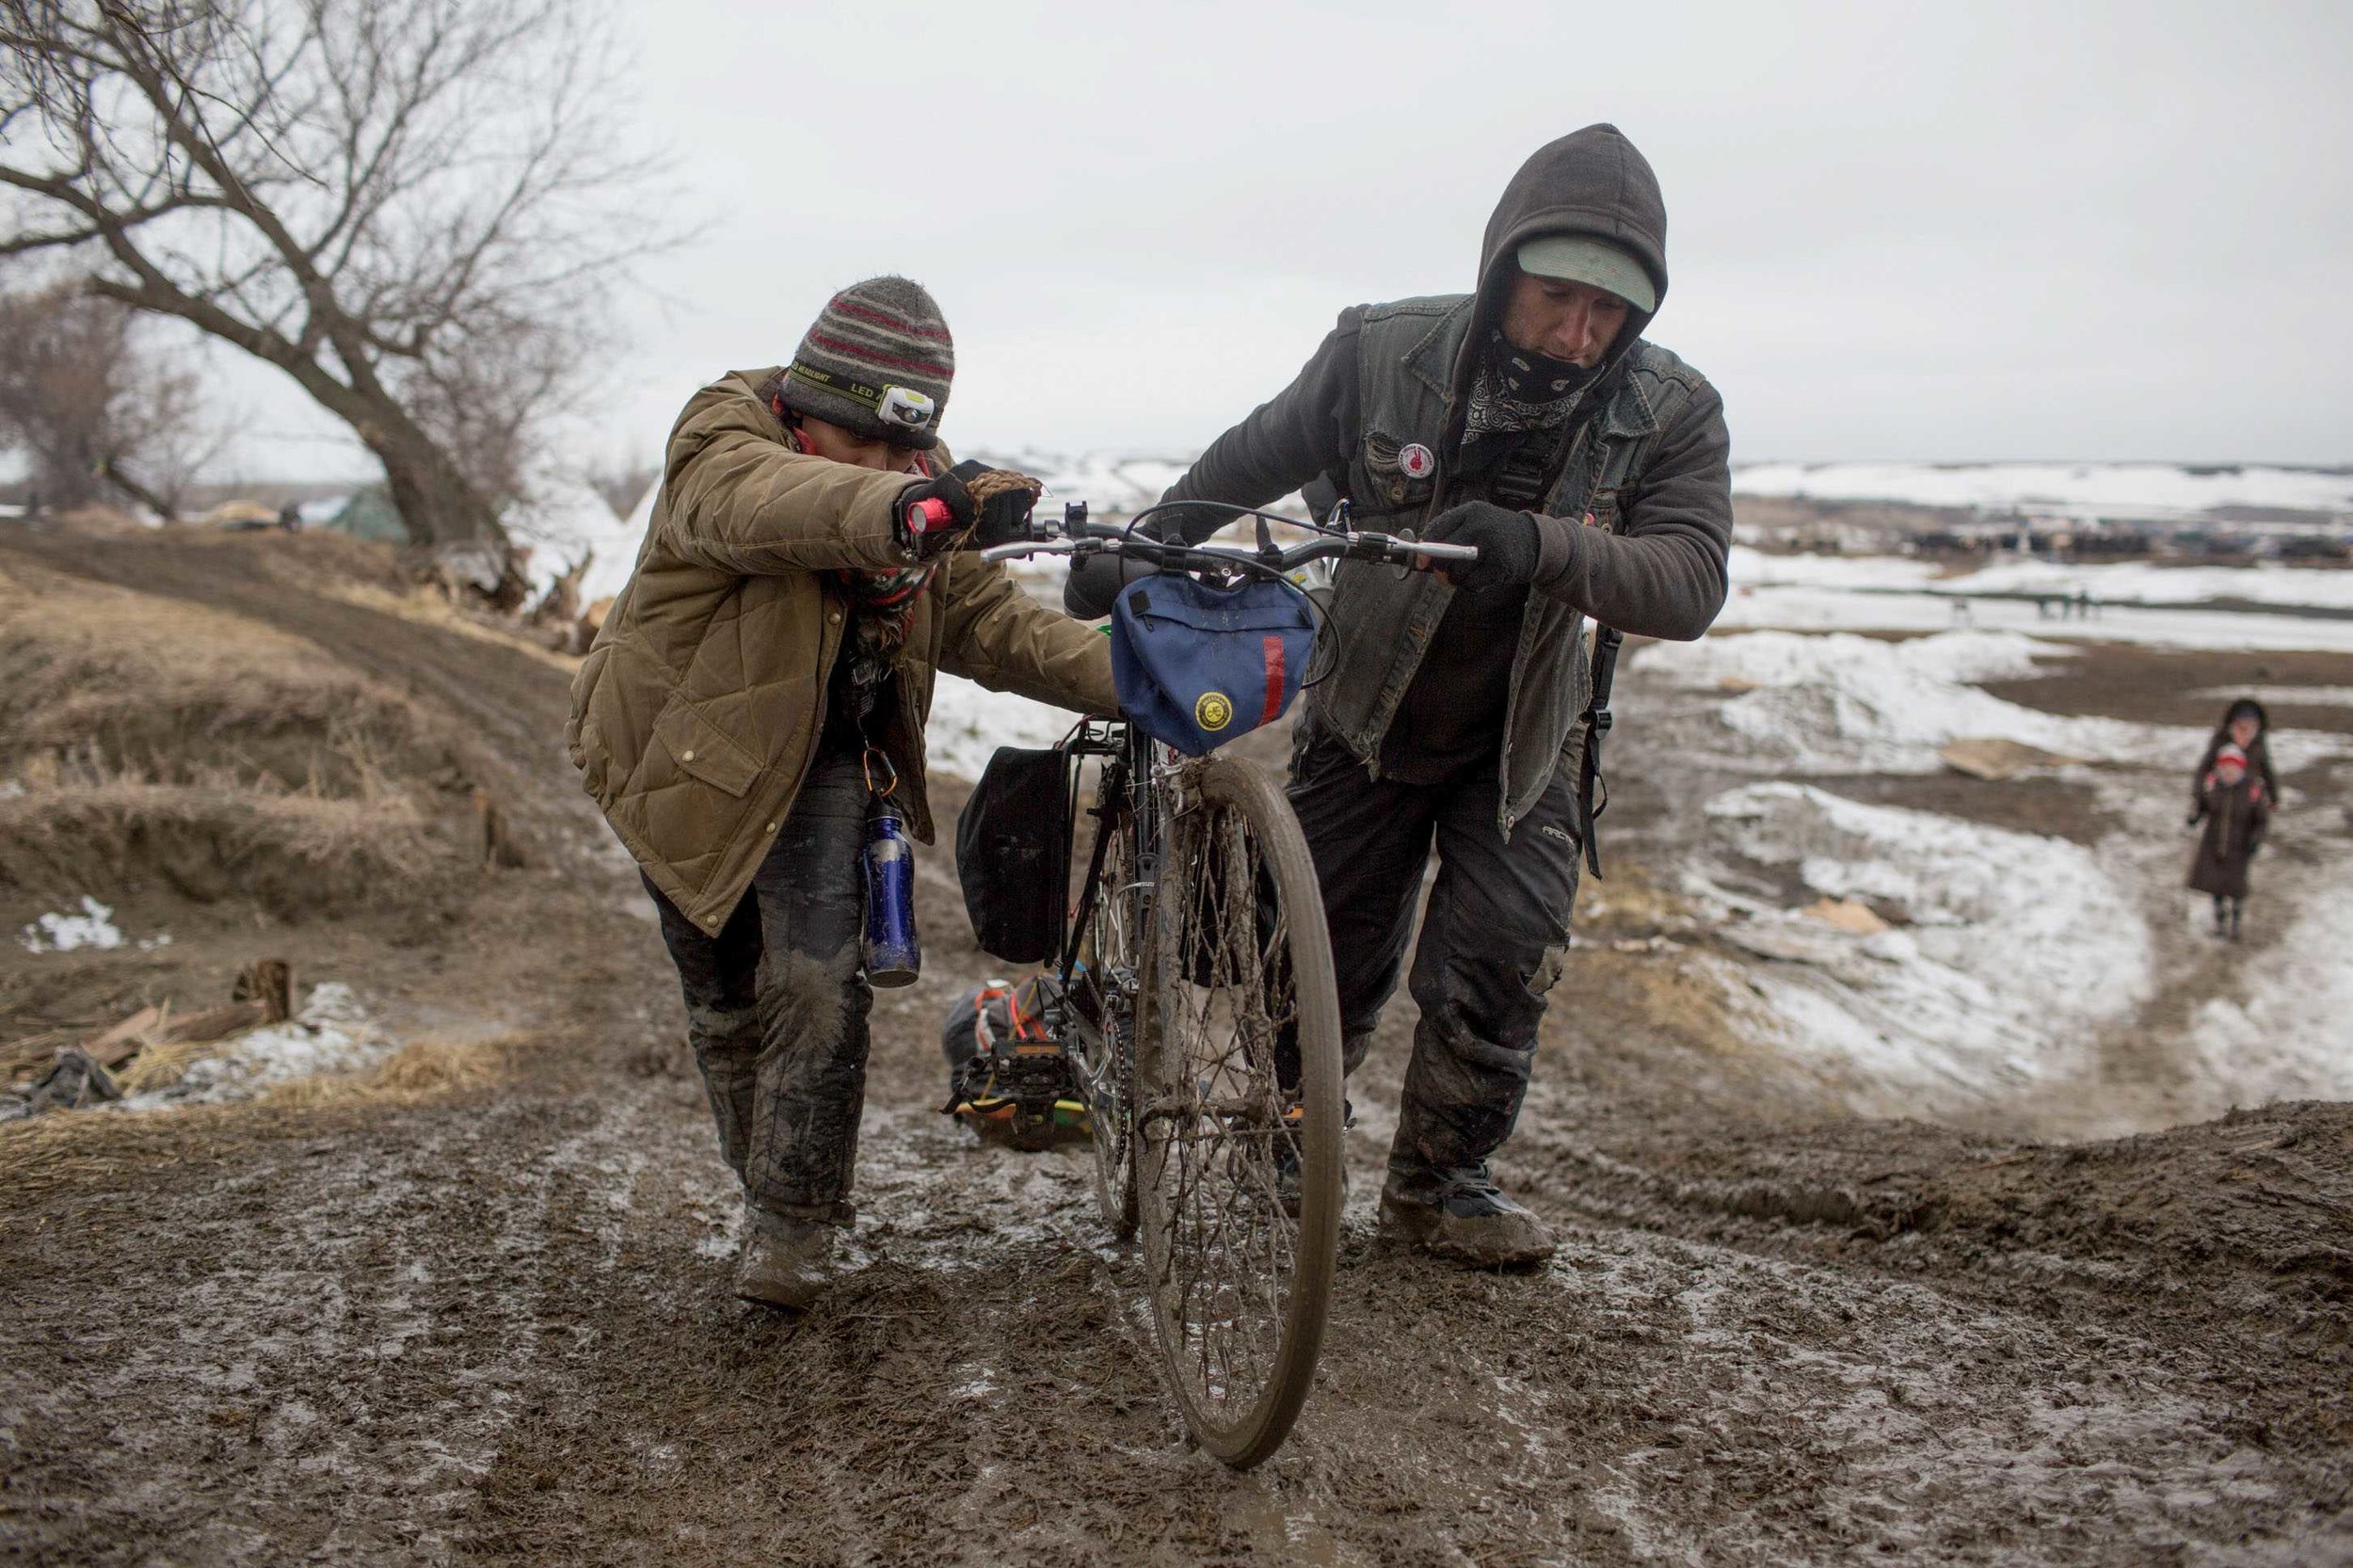  Water protectors push their bike up a hill in an effort to evacuate Rosebud Camp before Federal and state authorities (seen in the distance far right) move over the Cannonball River from Oceti Sakowin into the neighboring protest camps. Rosebud Camp